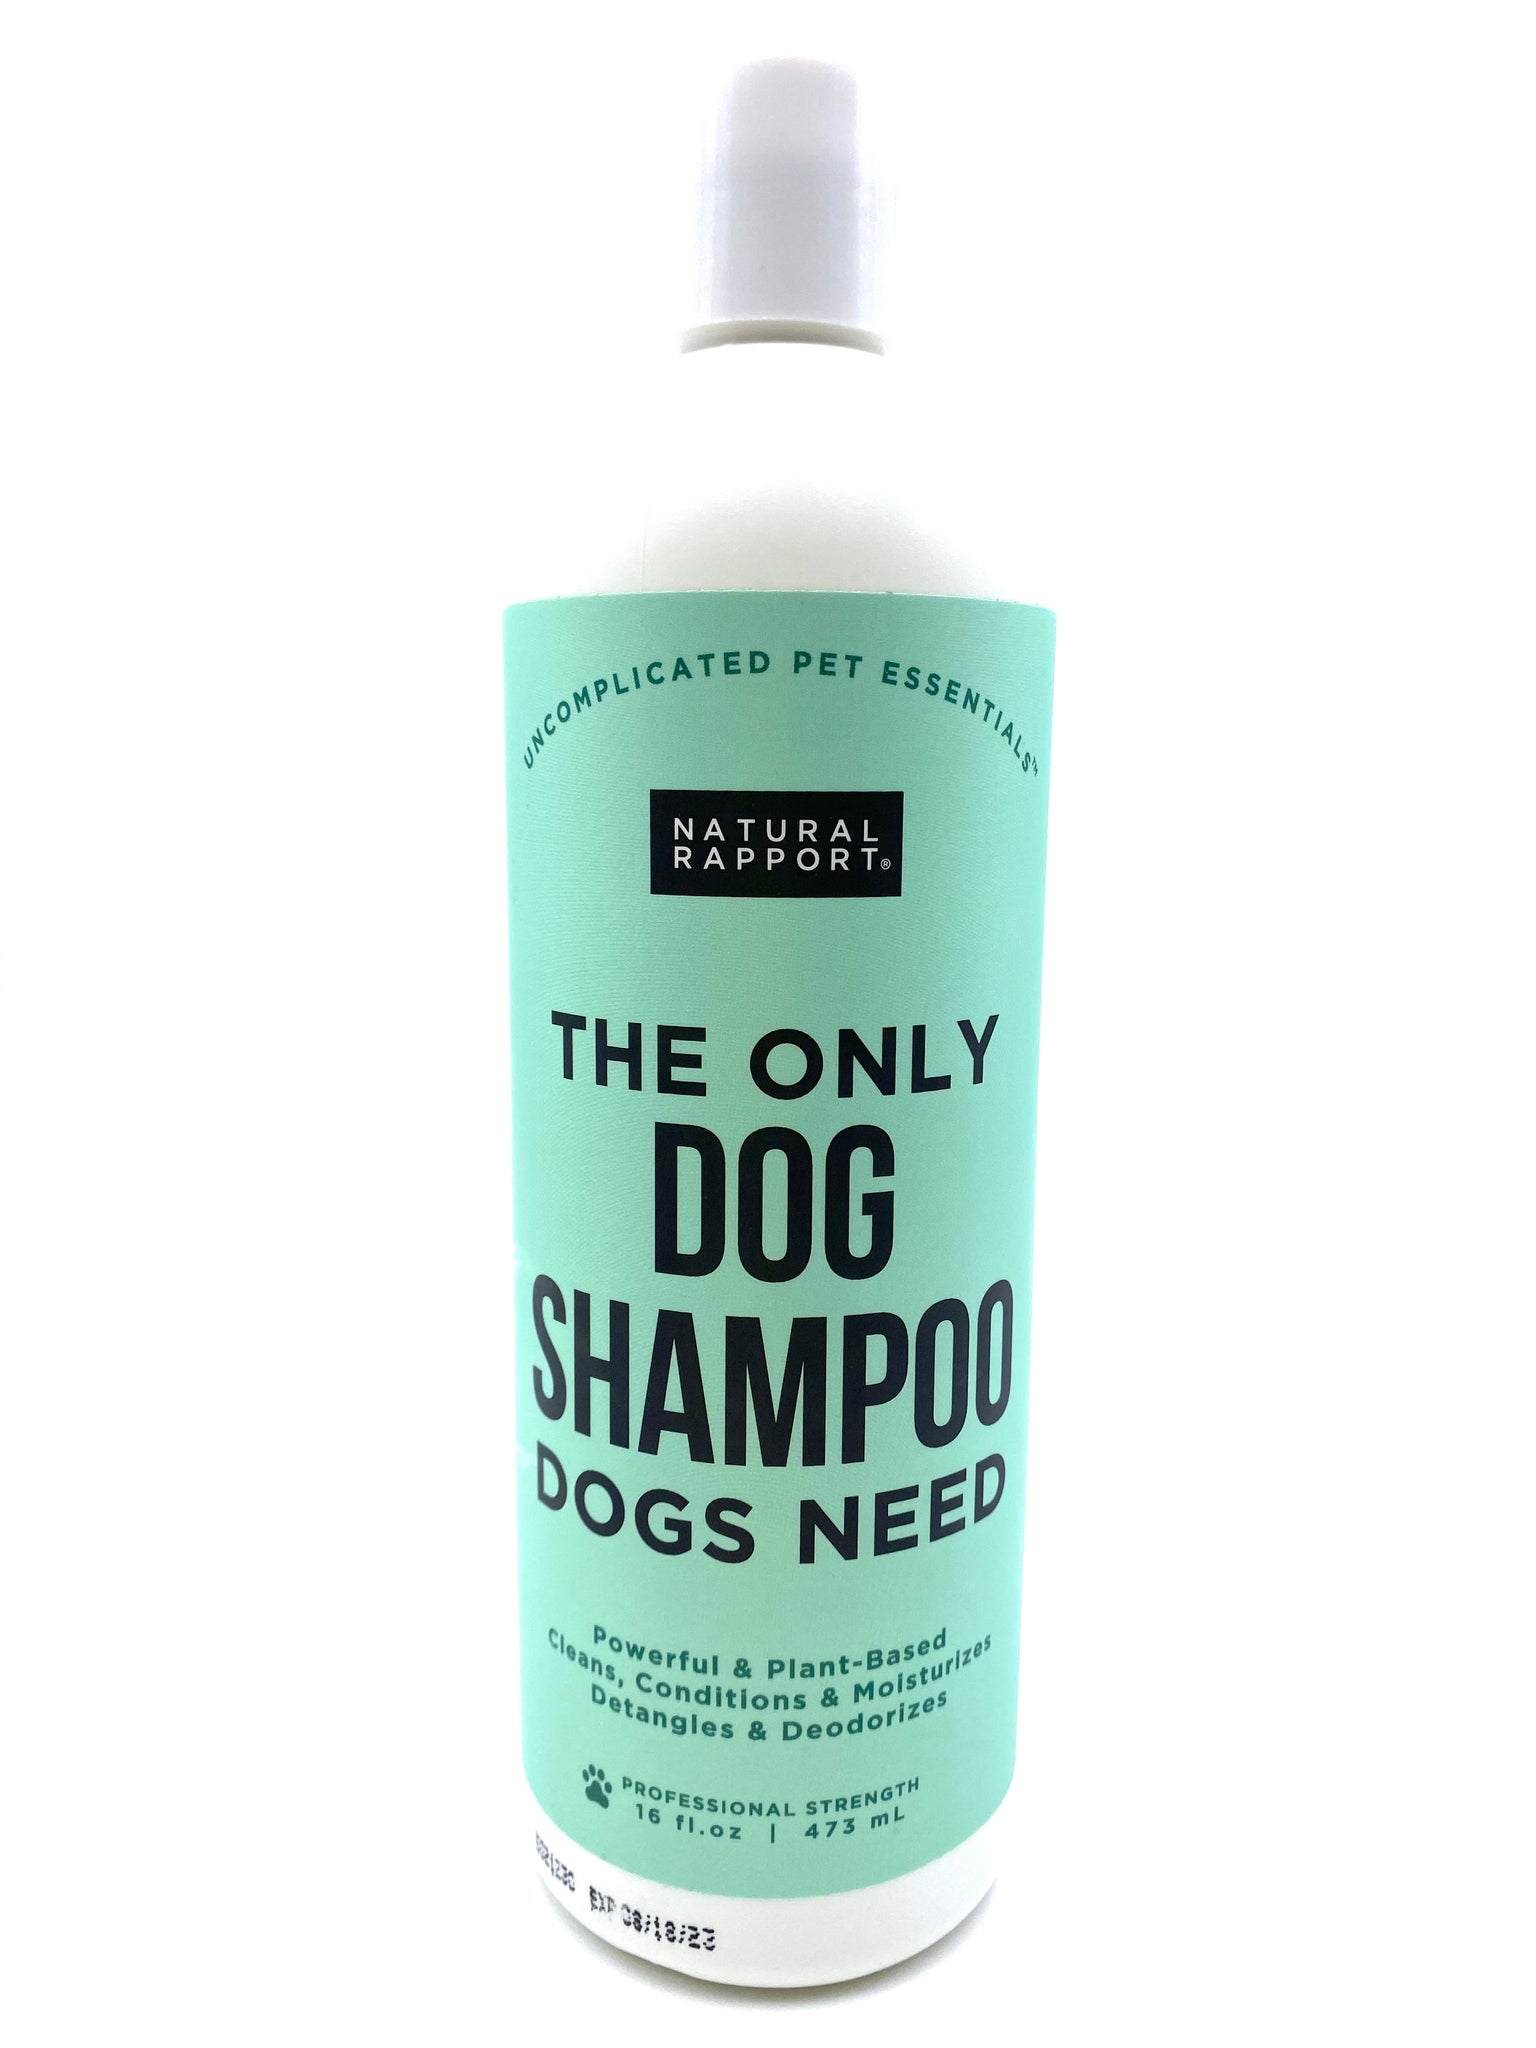 THE ONLY DOG SHAMPOO DOGS NEED: Natural Shampoo for Dogs, Plant-Based Grooming Products, Dog Shampoo for Itchy-Skin Relief